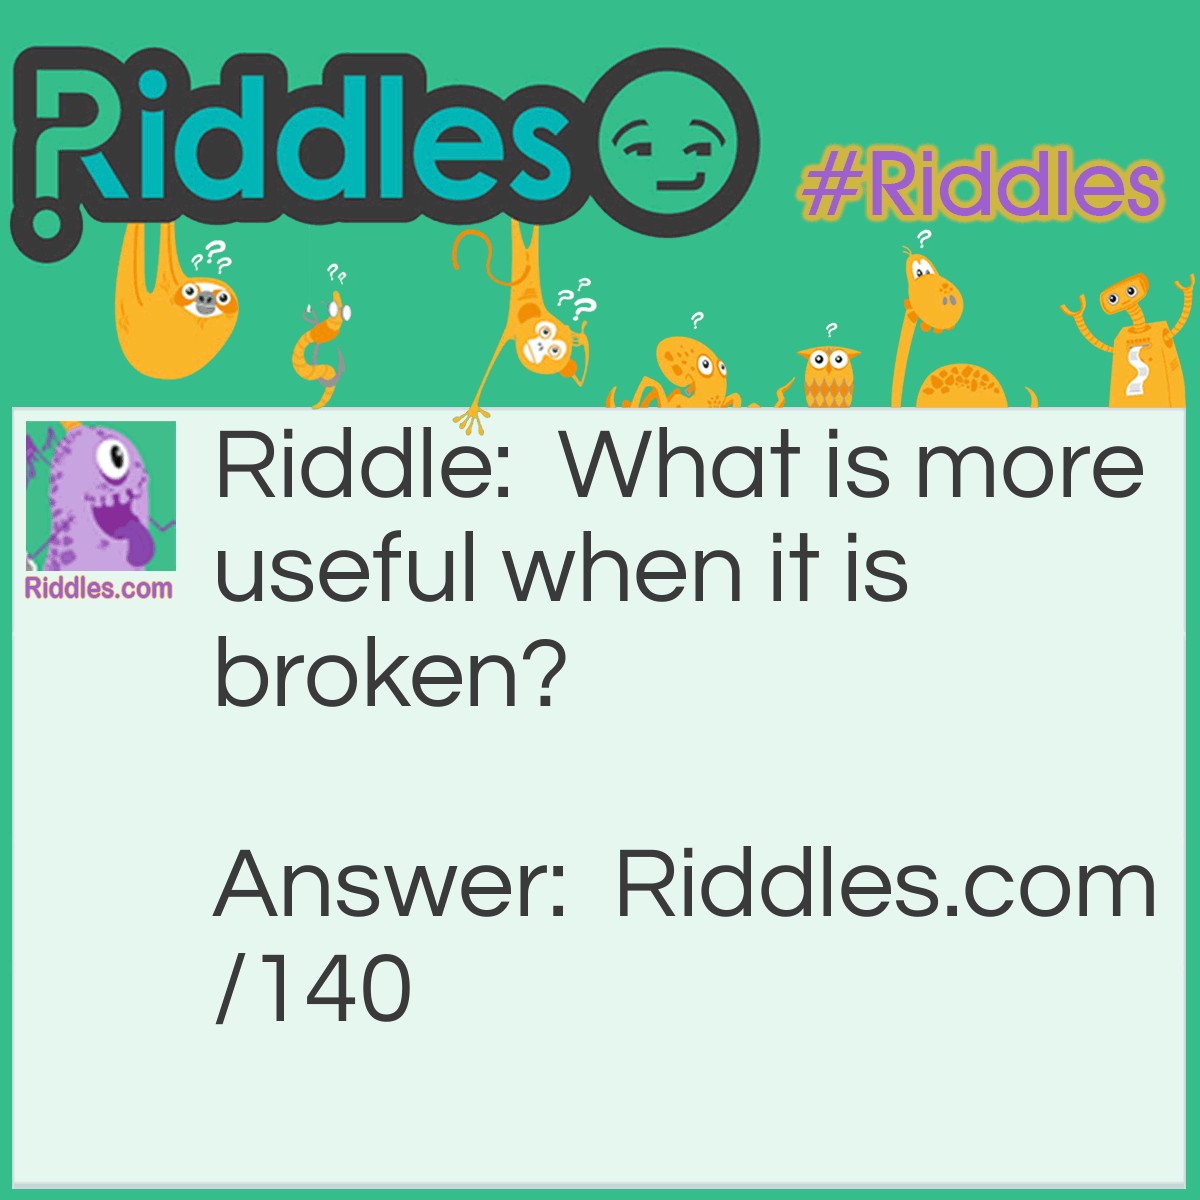 Riddle: What is more useful when it is broken? Answer: An <a href="/post/50/chicken-riddles">egg</a>.